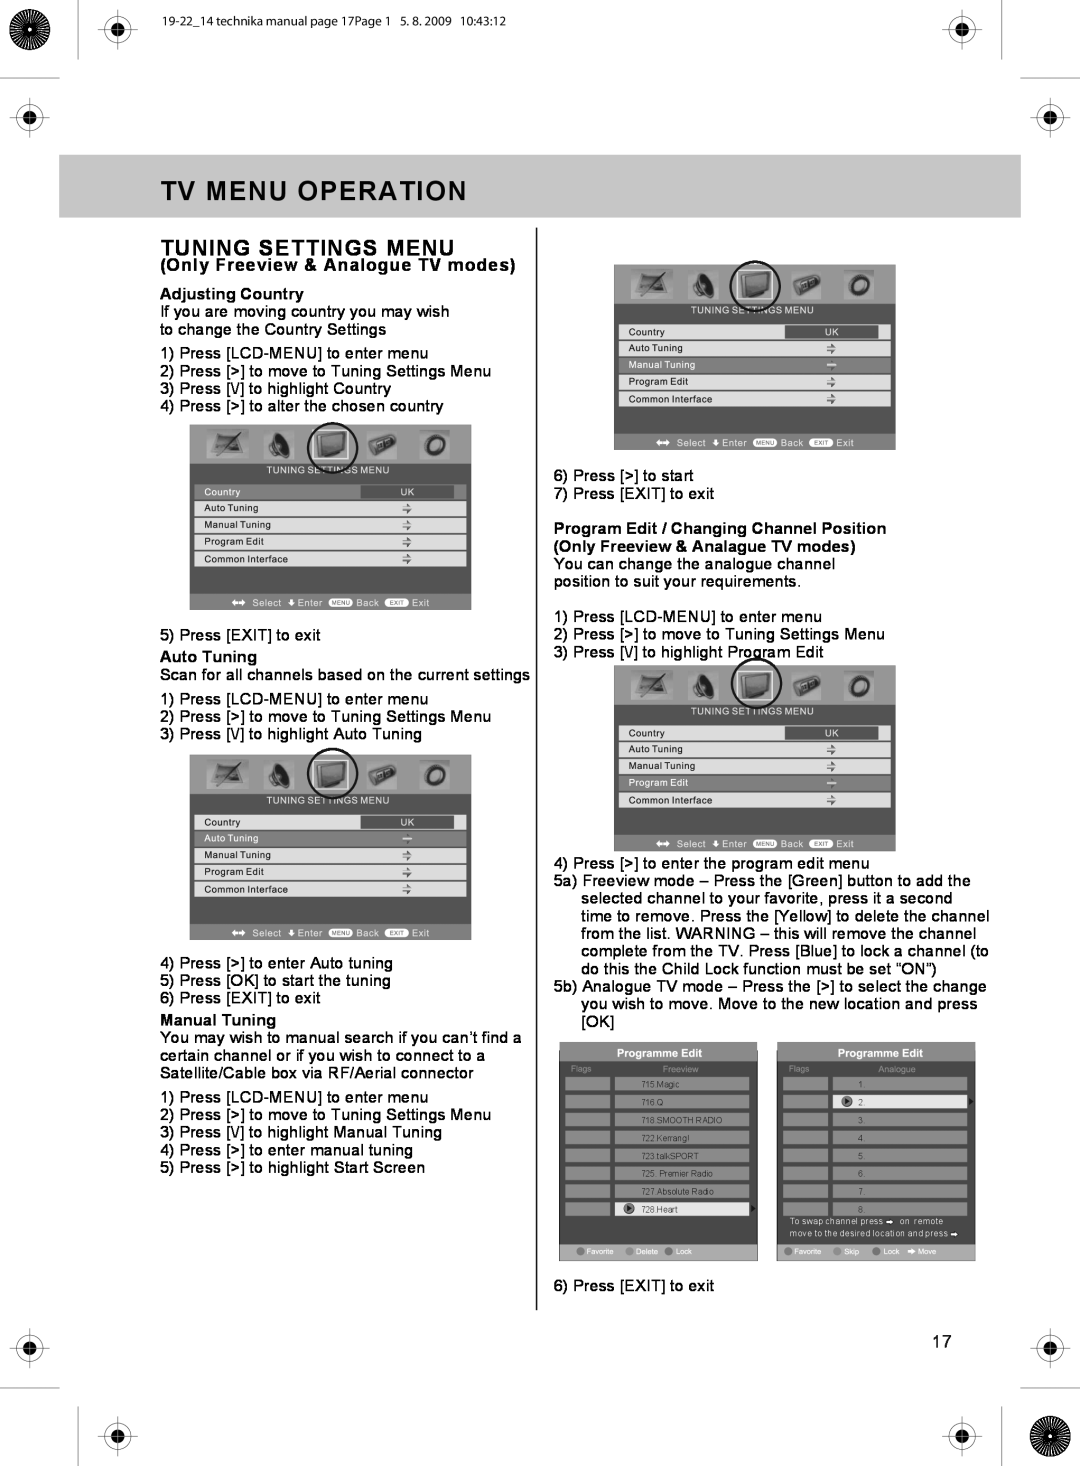 Technika 19-208 Tuning Settings Menu, Tv Menu Operation, Only Freeview & Analogue TV modes, Adjusting Country, Auto Tuning 